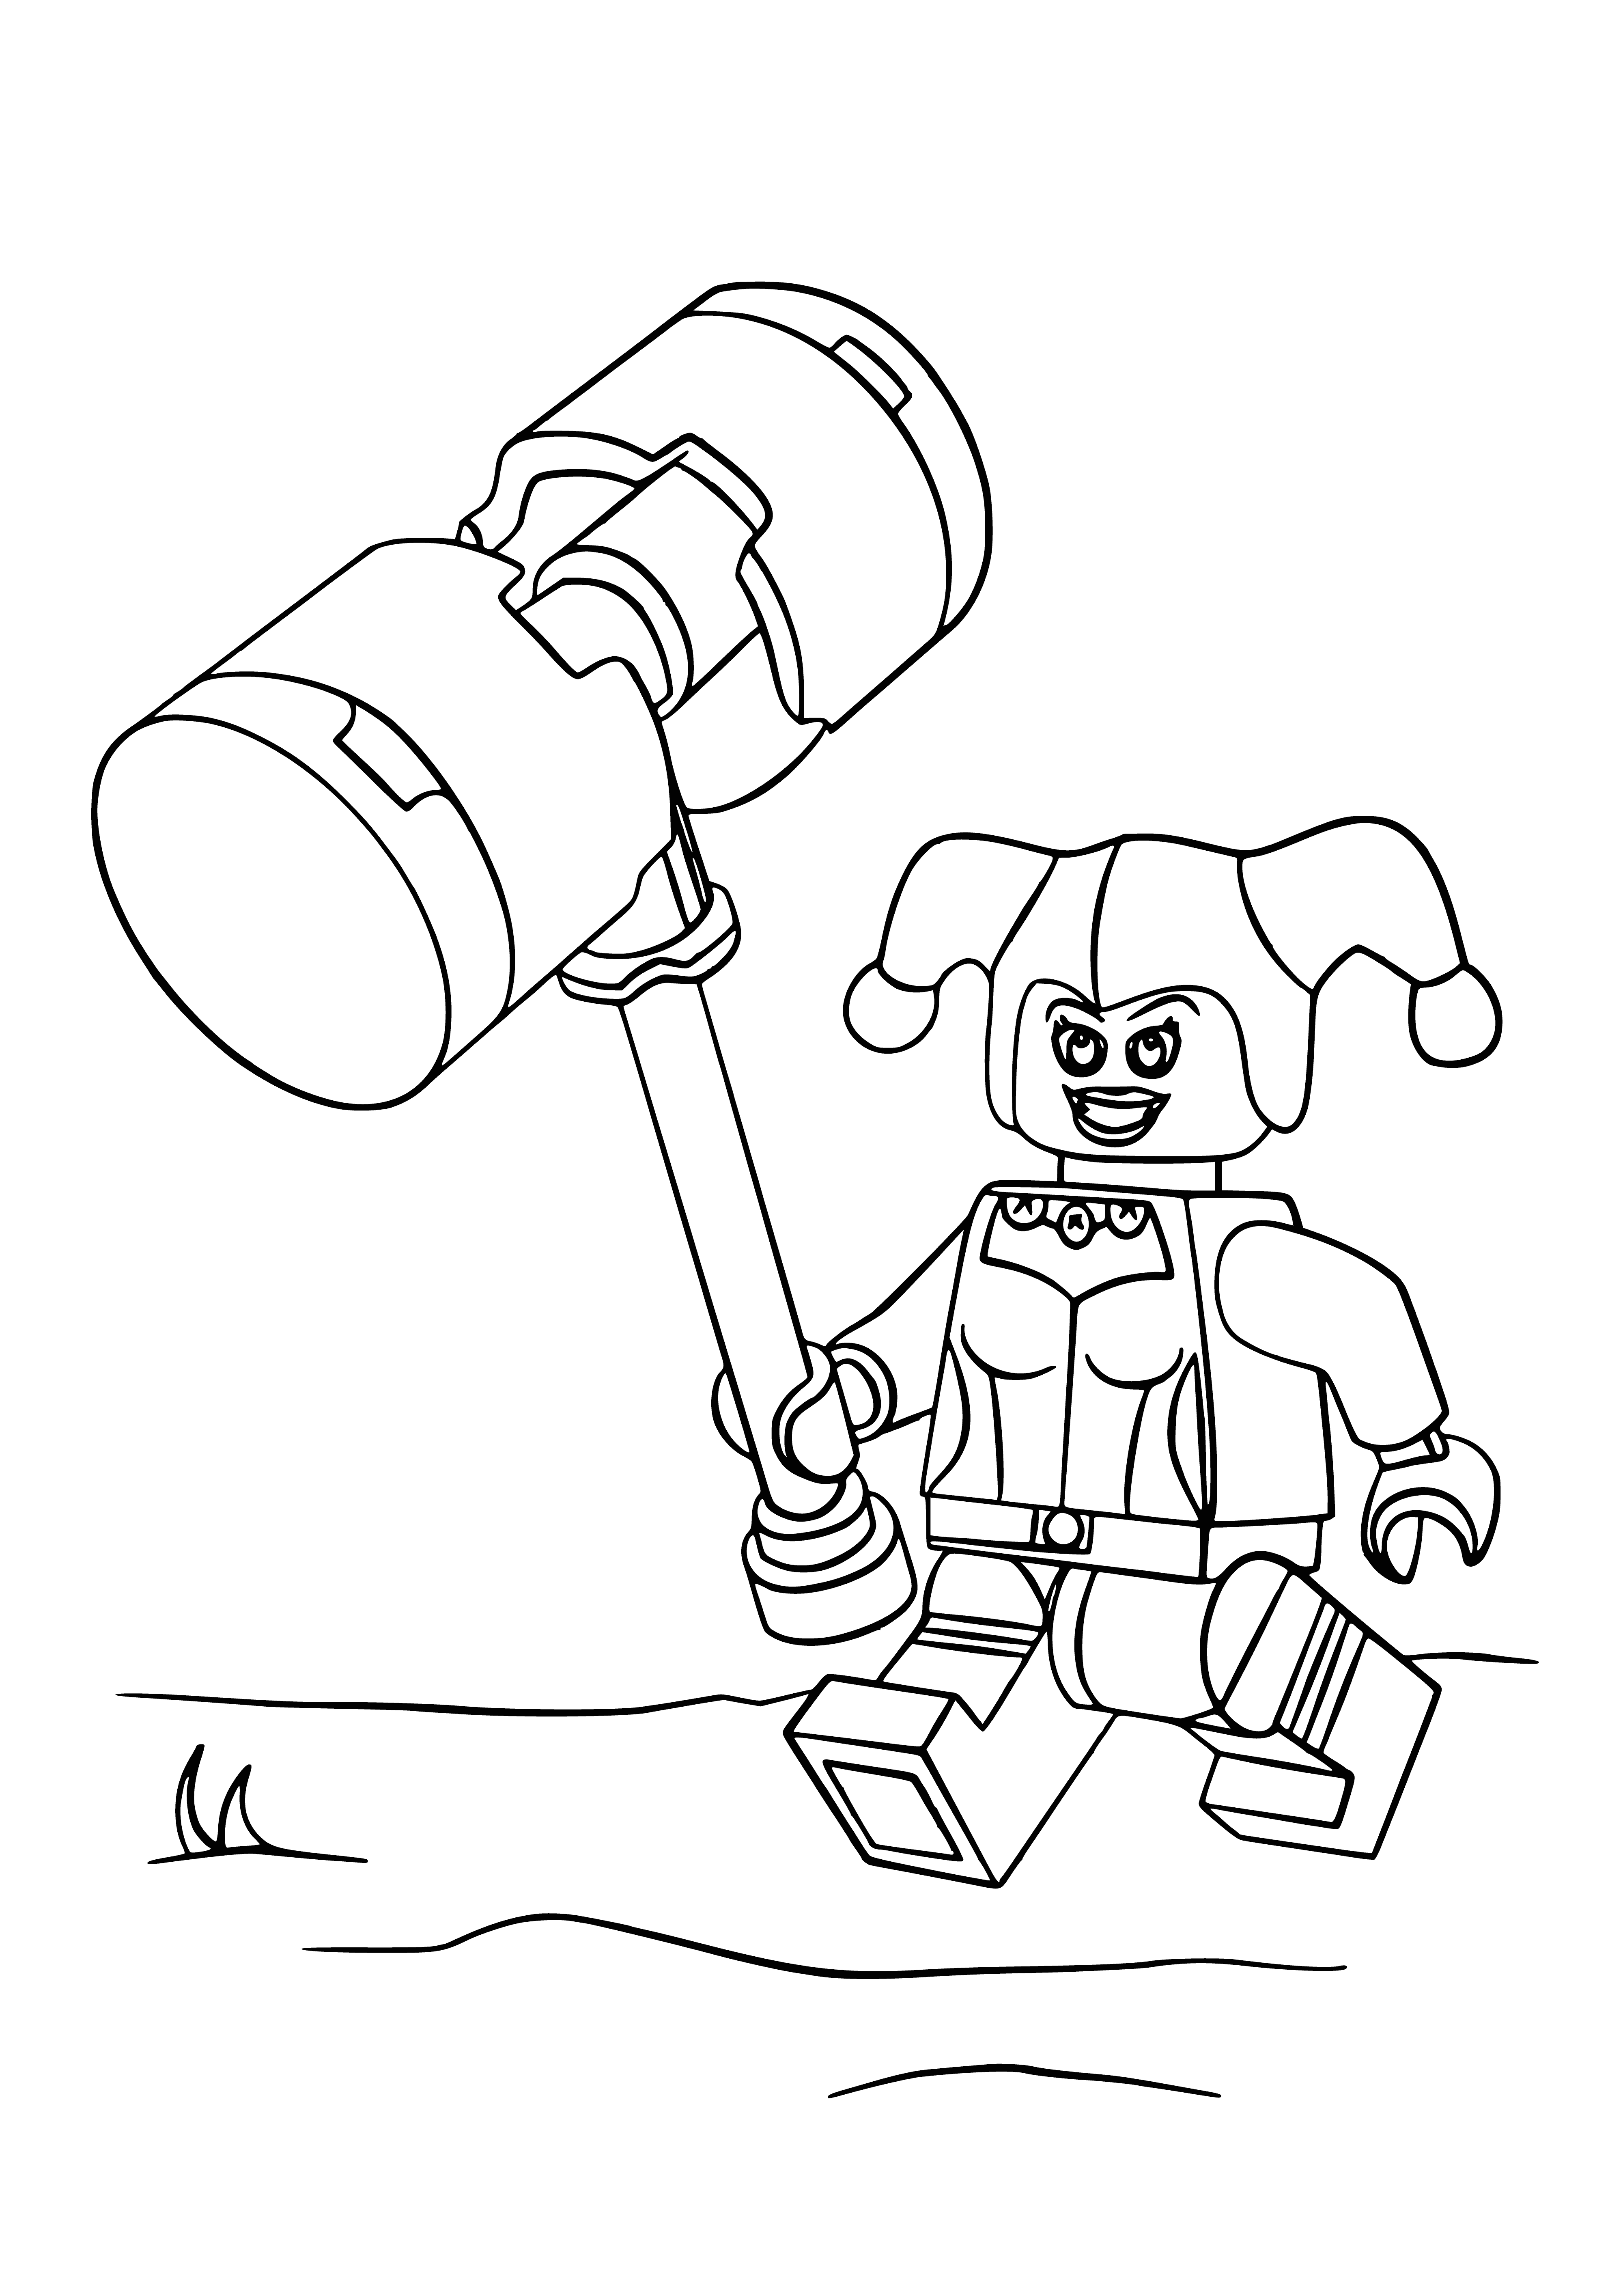 coloring page: Harley Quinn coloring page features her with blonde hair, blue and red armor, black and red gun with Batman in black, red, and yellow. #LEGOBatman